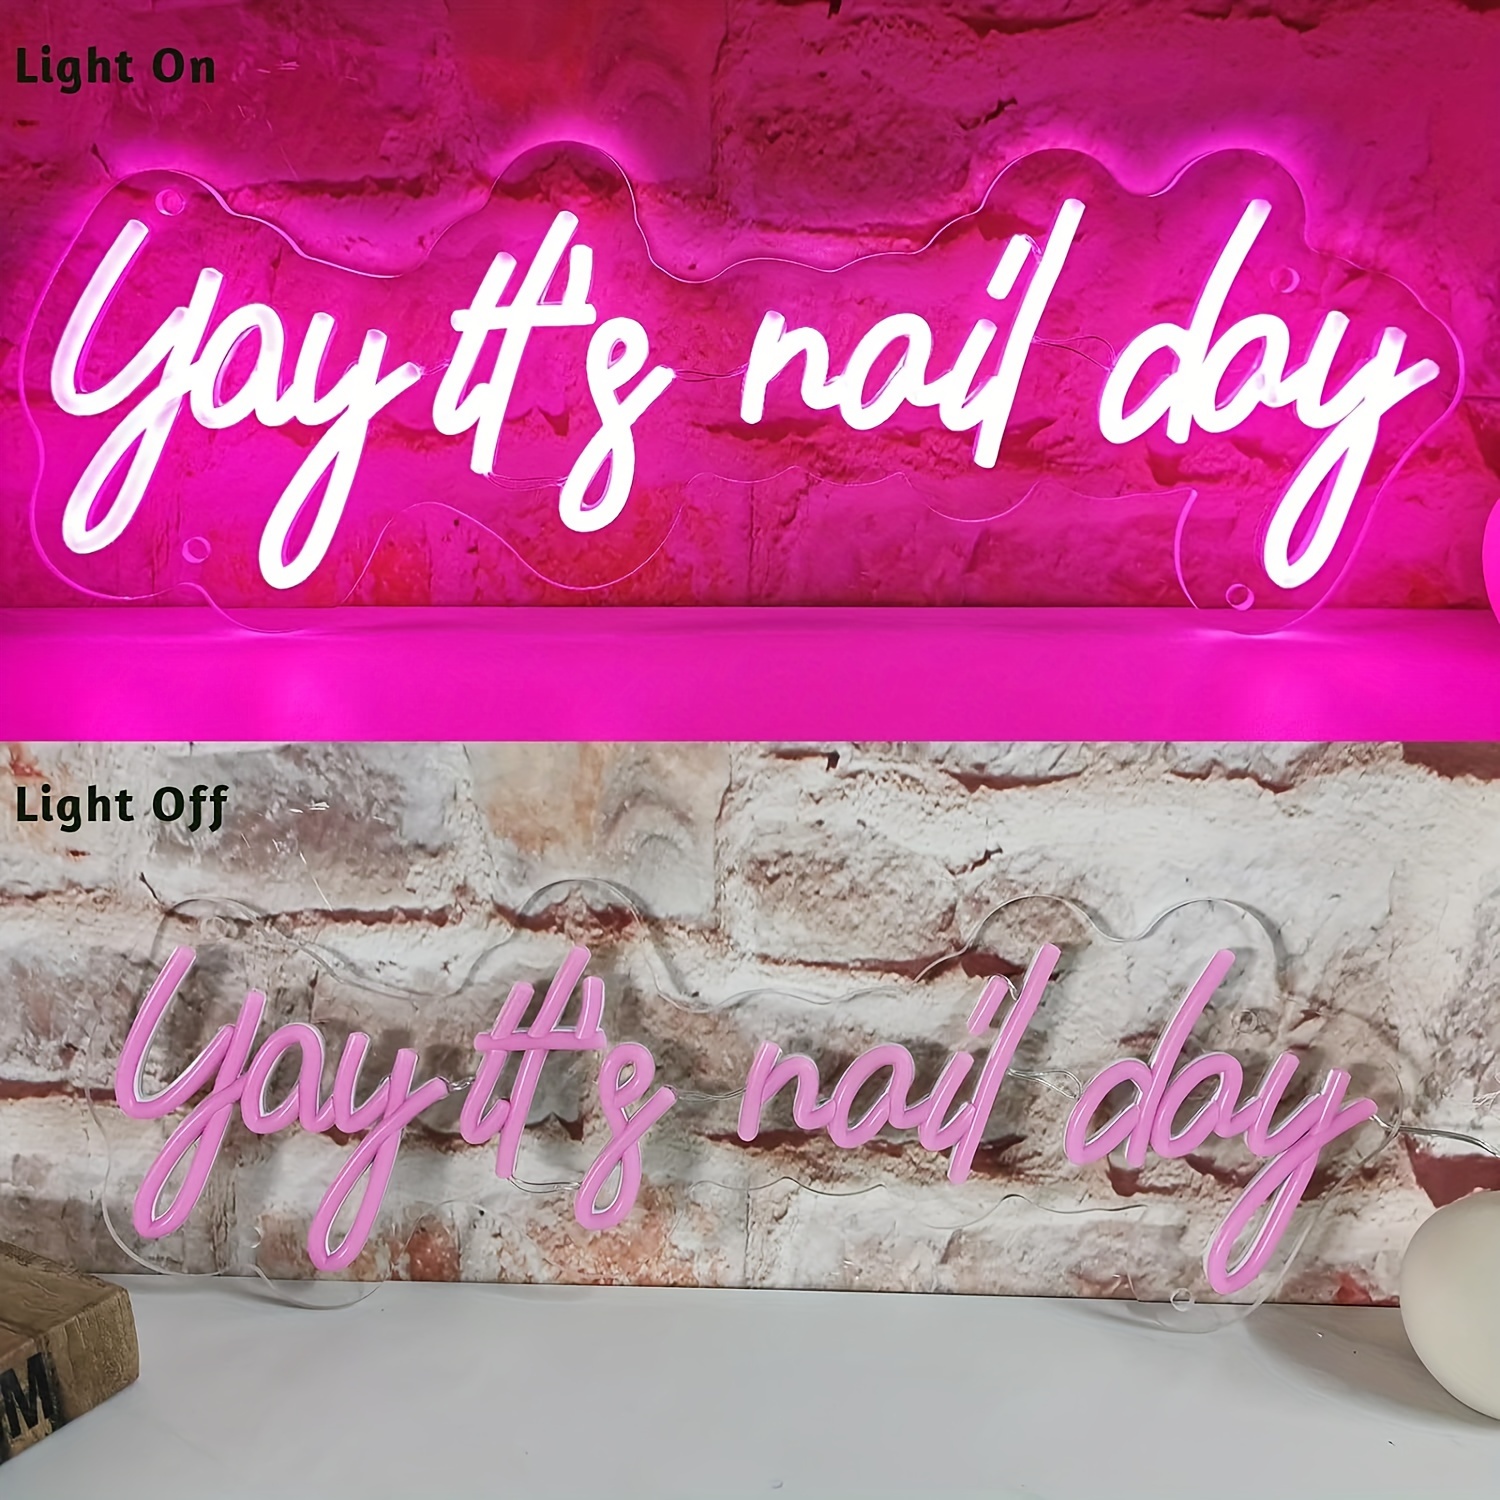  Yay it's nail day Neon Sign, Nails Neon Sign, Nail Salon Decor  Open Welcome Signage Business Store Light, Nail Room Decor Beauty Salon  Wall Decor Light Aesthetic Room Makeup Studio Sign